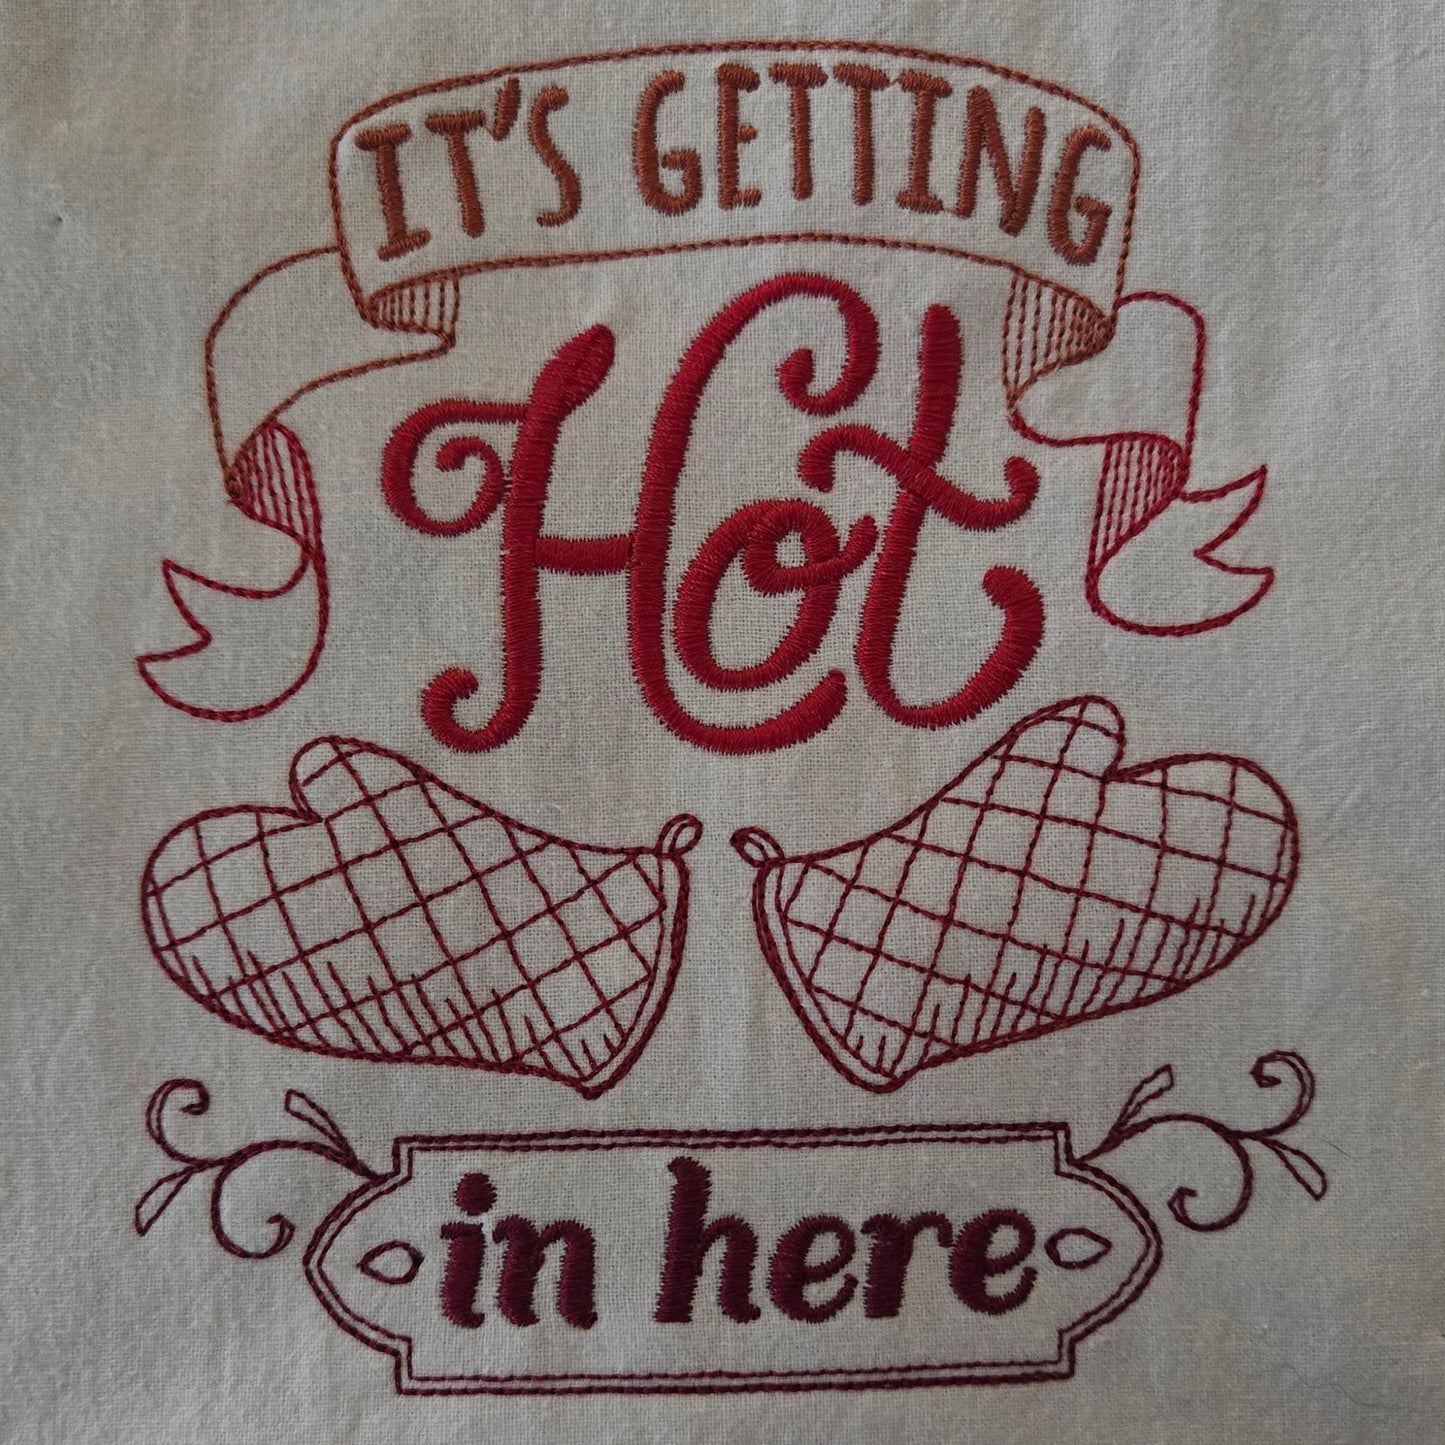 It's Getting Hot in Here - Kitchen Outlines (Embroidered CYO)